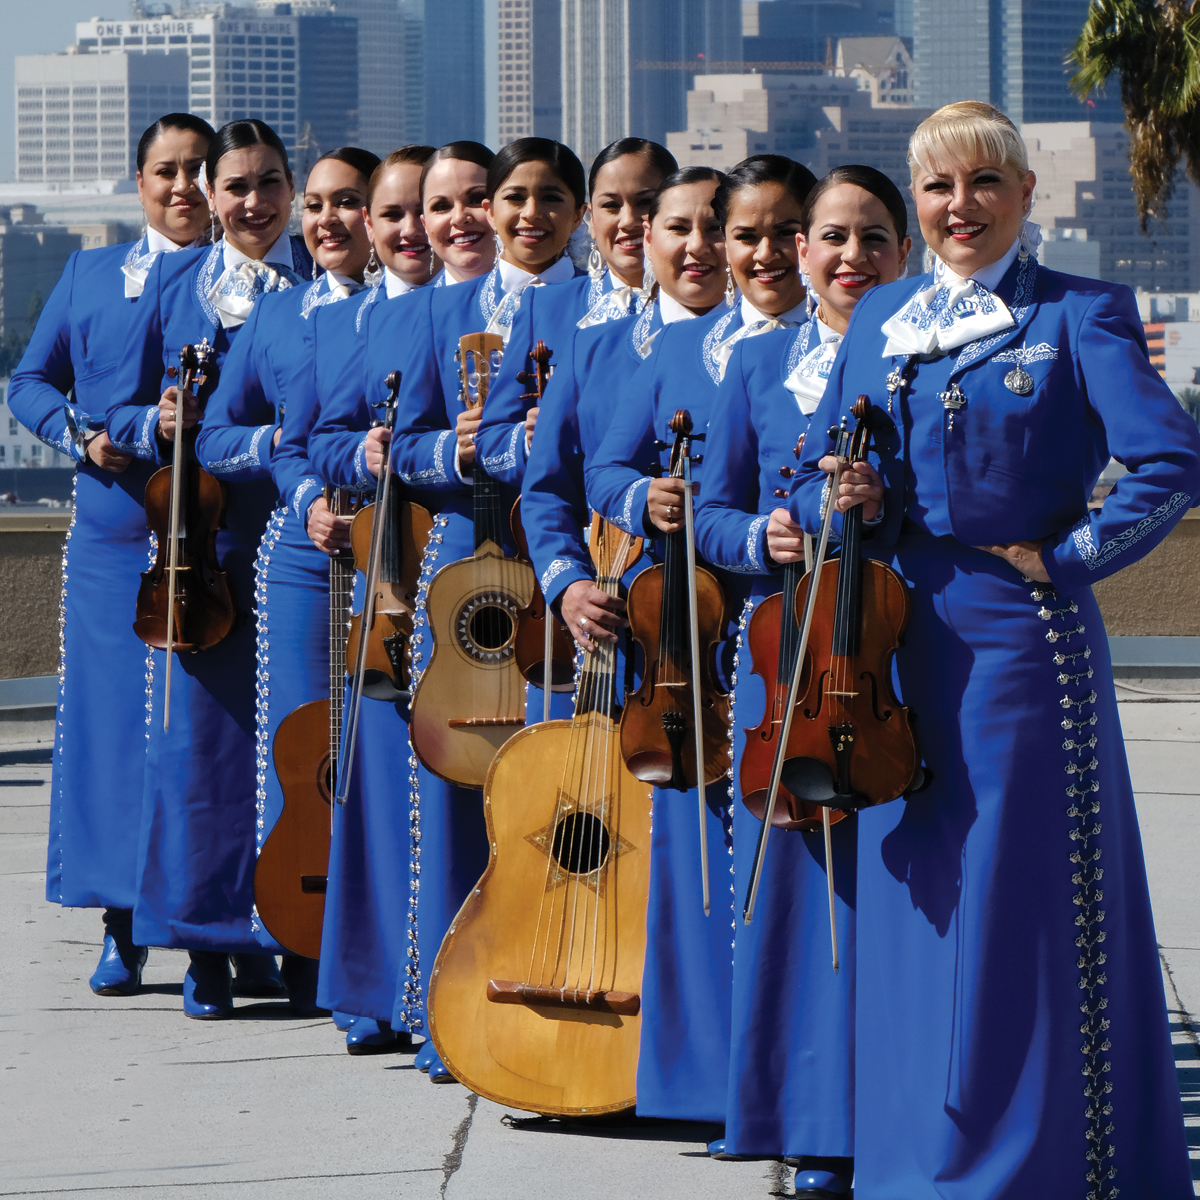 11 artists in blue charro outfits holding instruments.